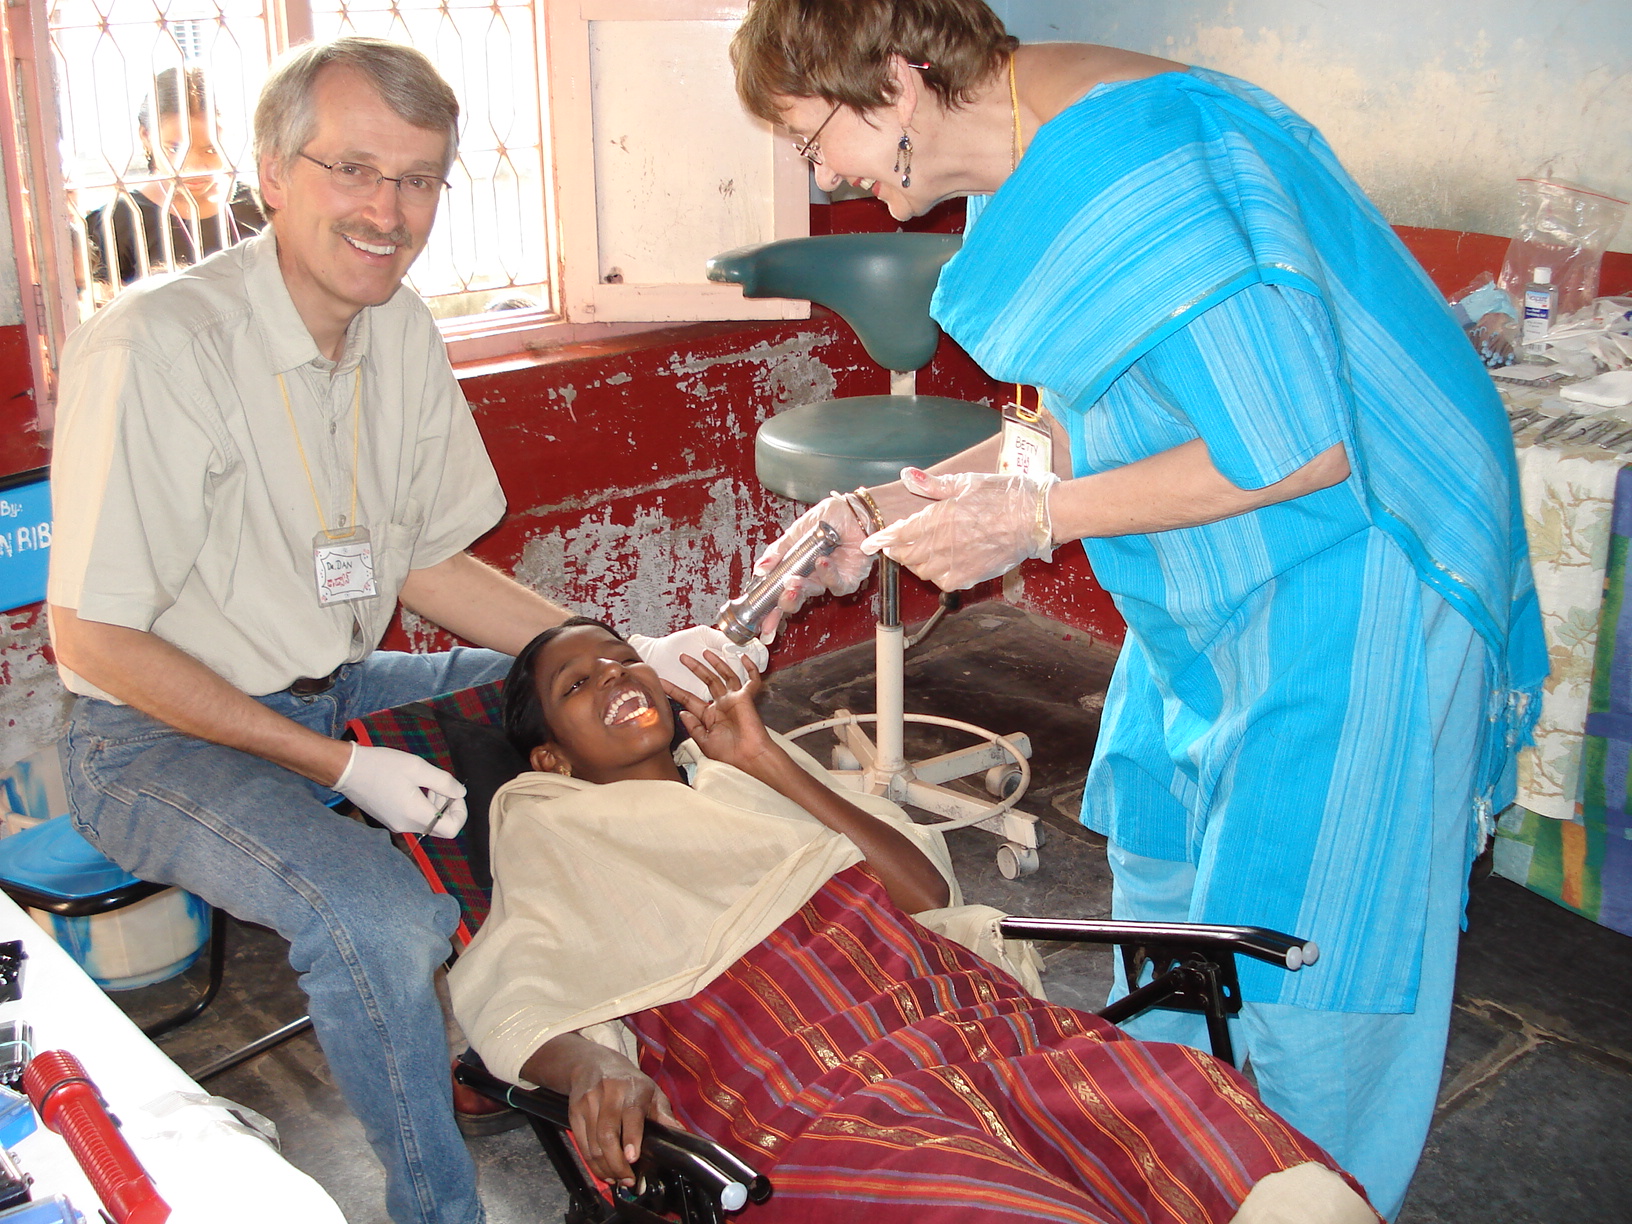 dental mission trips in the united states